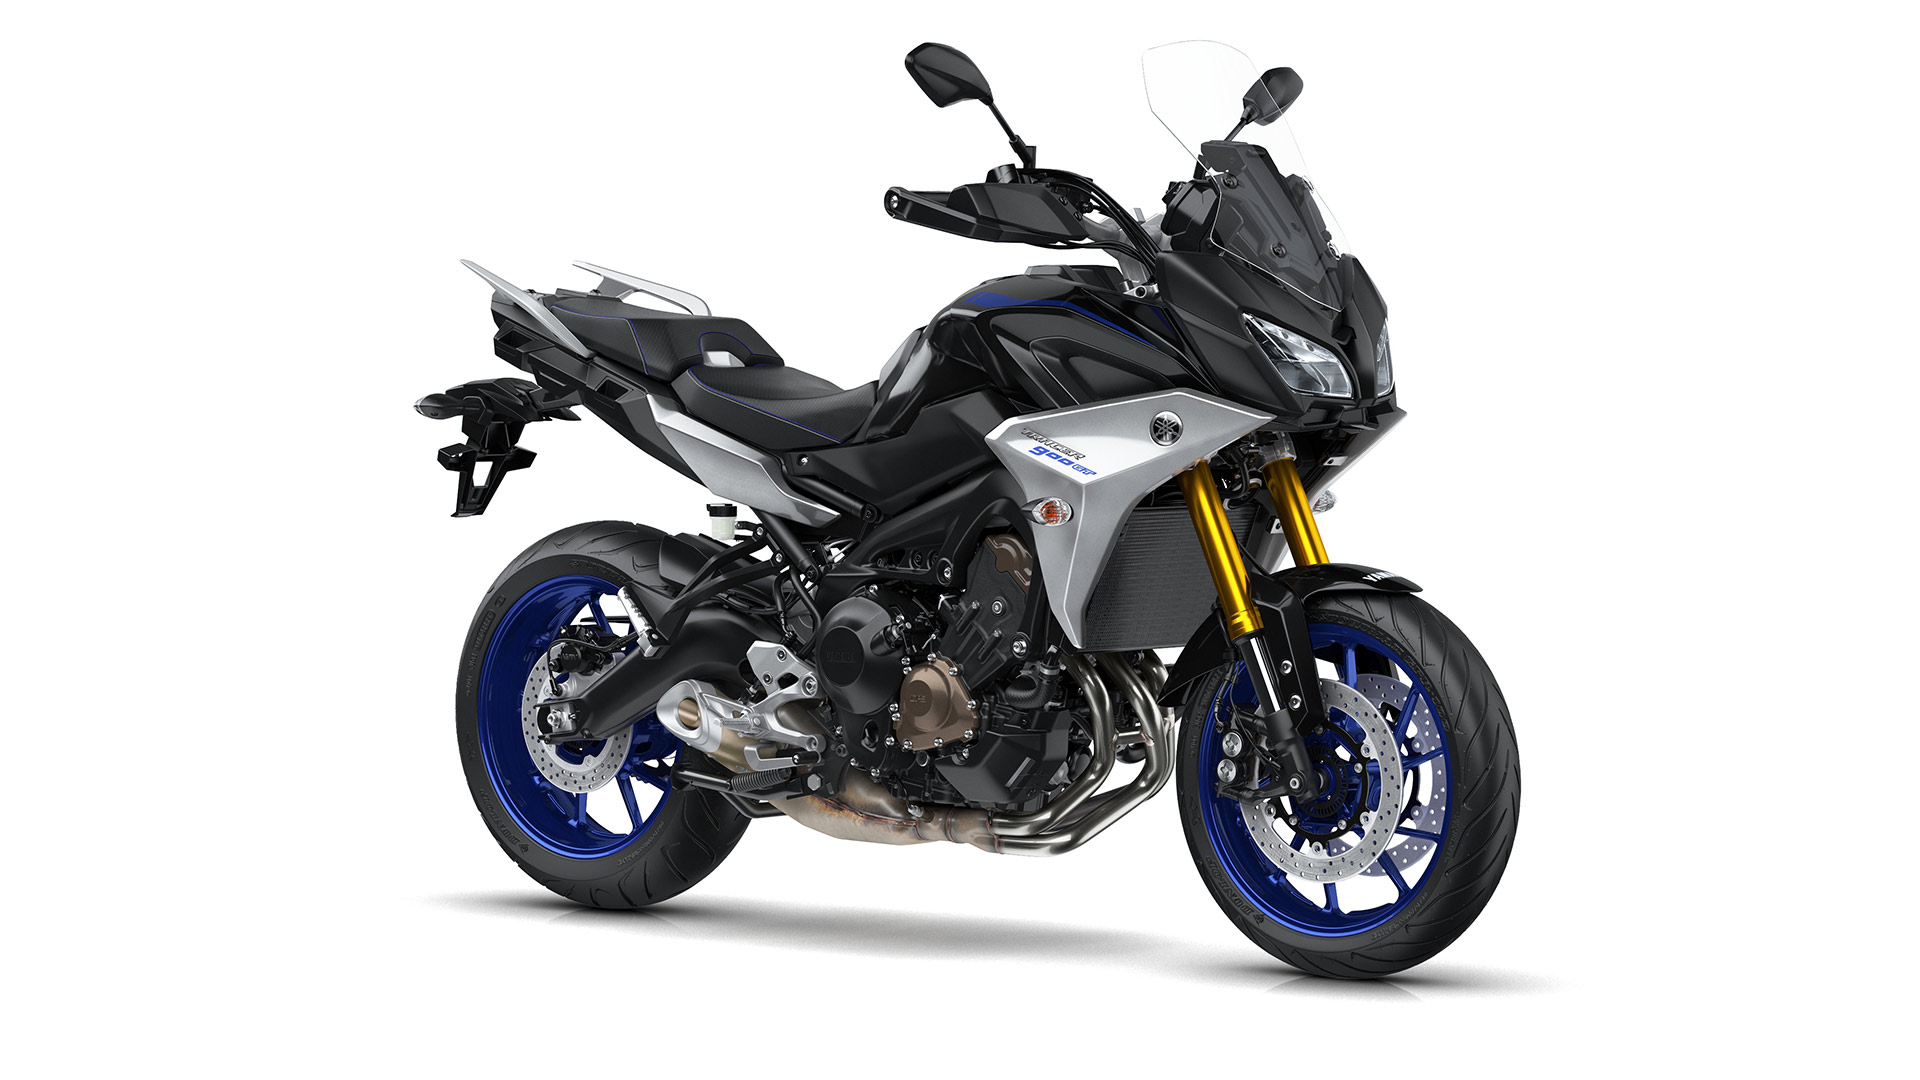 YAMAHA MT-09 TRACER GT - TURN UP YOUR EXPERIENCE:
Featuring an all‑new engine and premium sport touring features that come standard, the most versatile touring partner for when you're commuting or riding across the mountains.